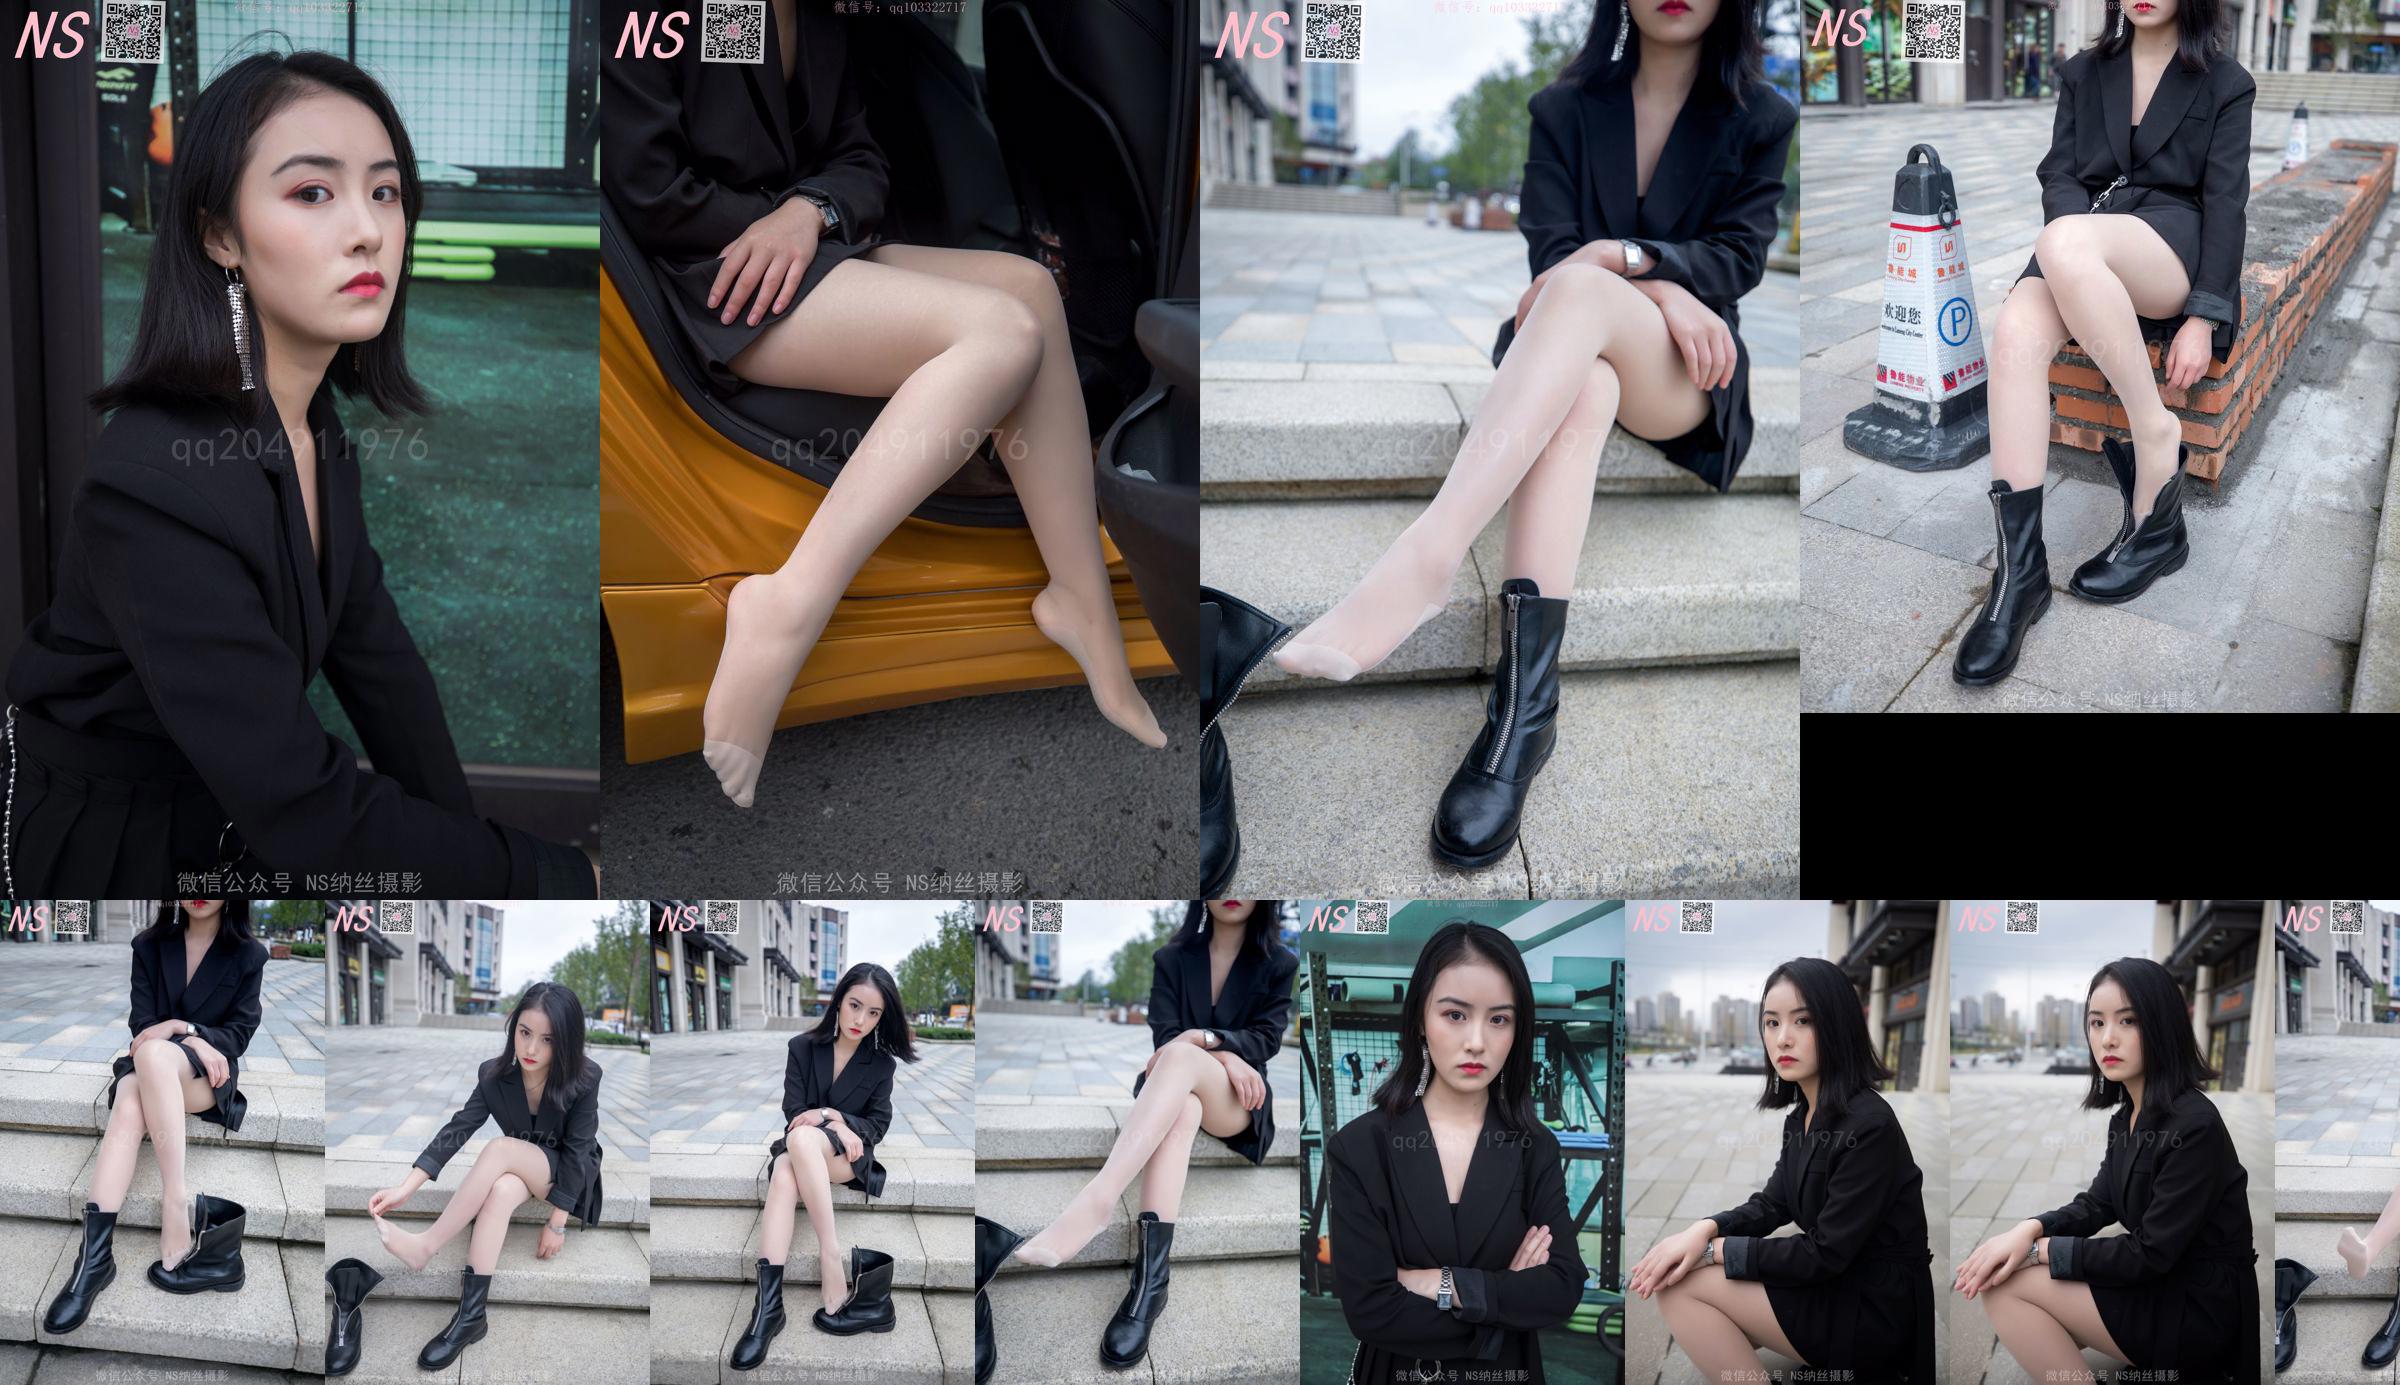 Yishuang "Special Wonderful Boots and Stockings" [Nass Photography] No.4ea1aa Page 3